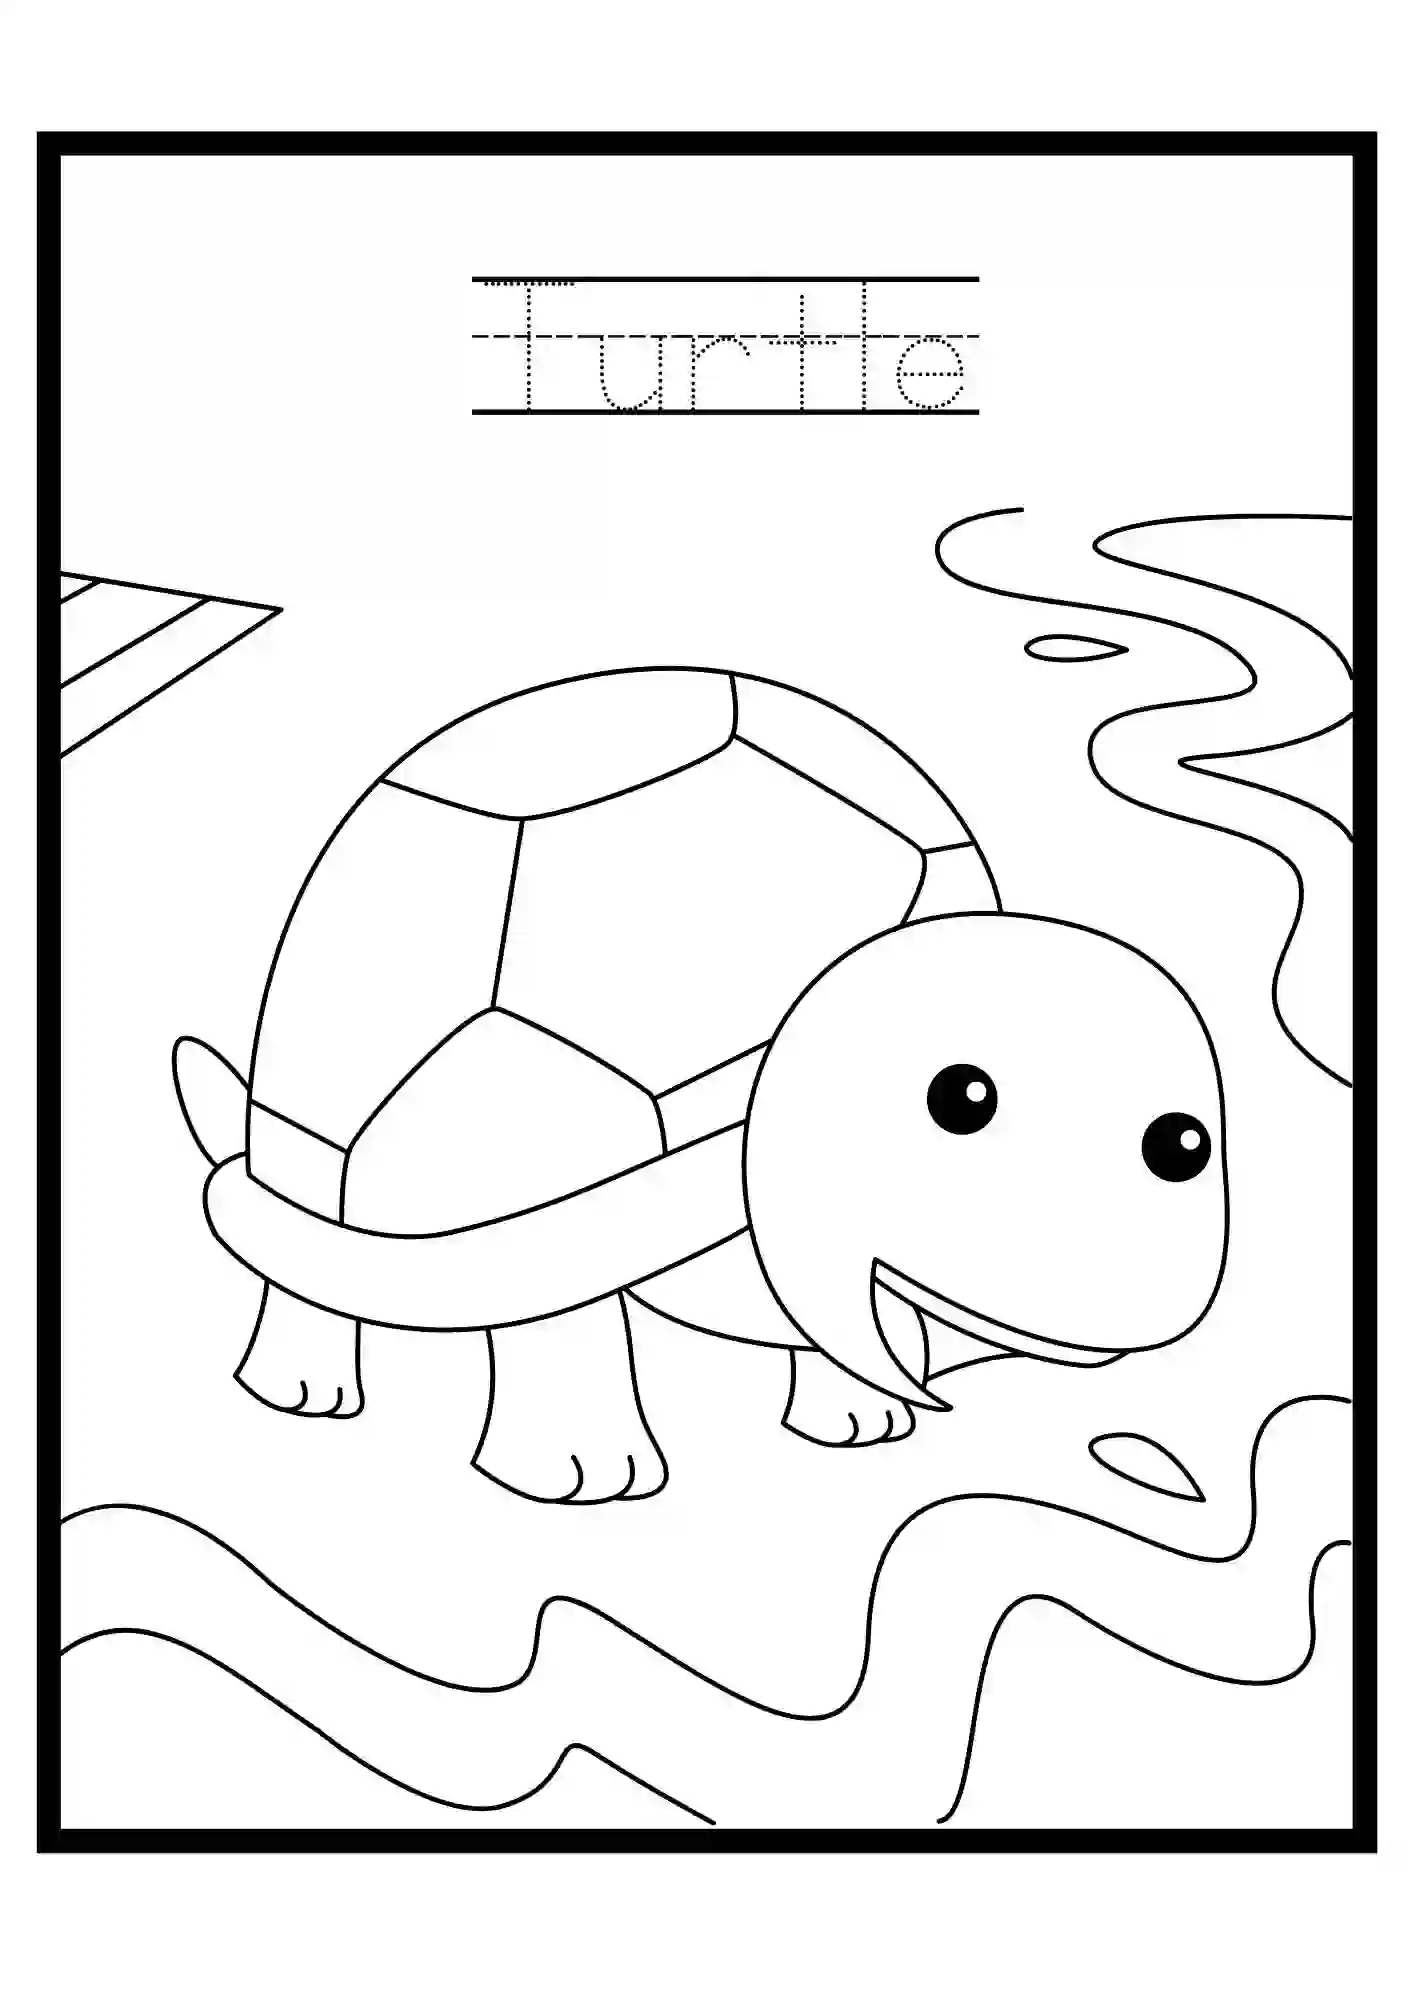 Under the Water Colouring Worksheets turtle